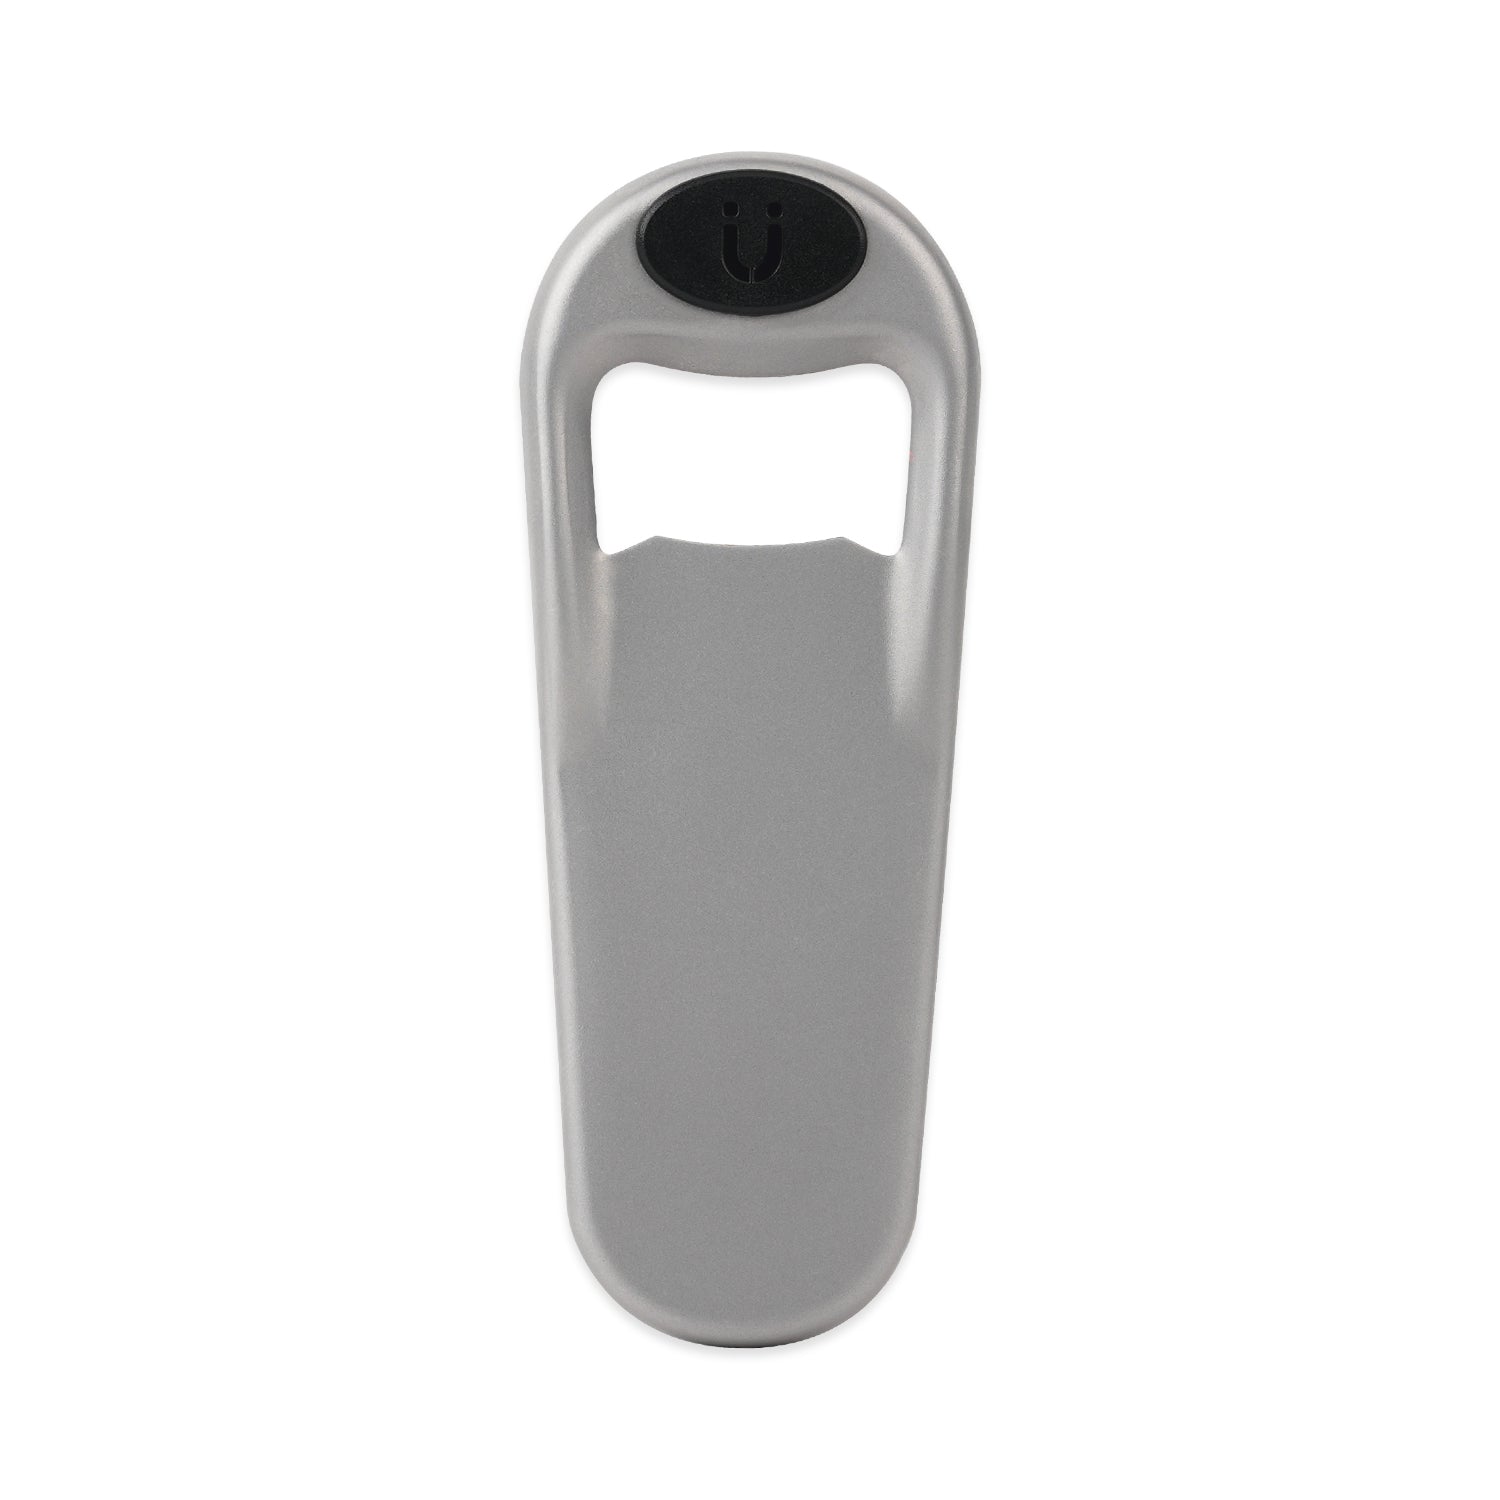 KITCHENDAO Magnetic Bottle and Can Opener for Refrigerator, Stainless Steel  Manual Can Punch Opener for Liquid with Cap Catcher, Stick to Fridge for